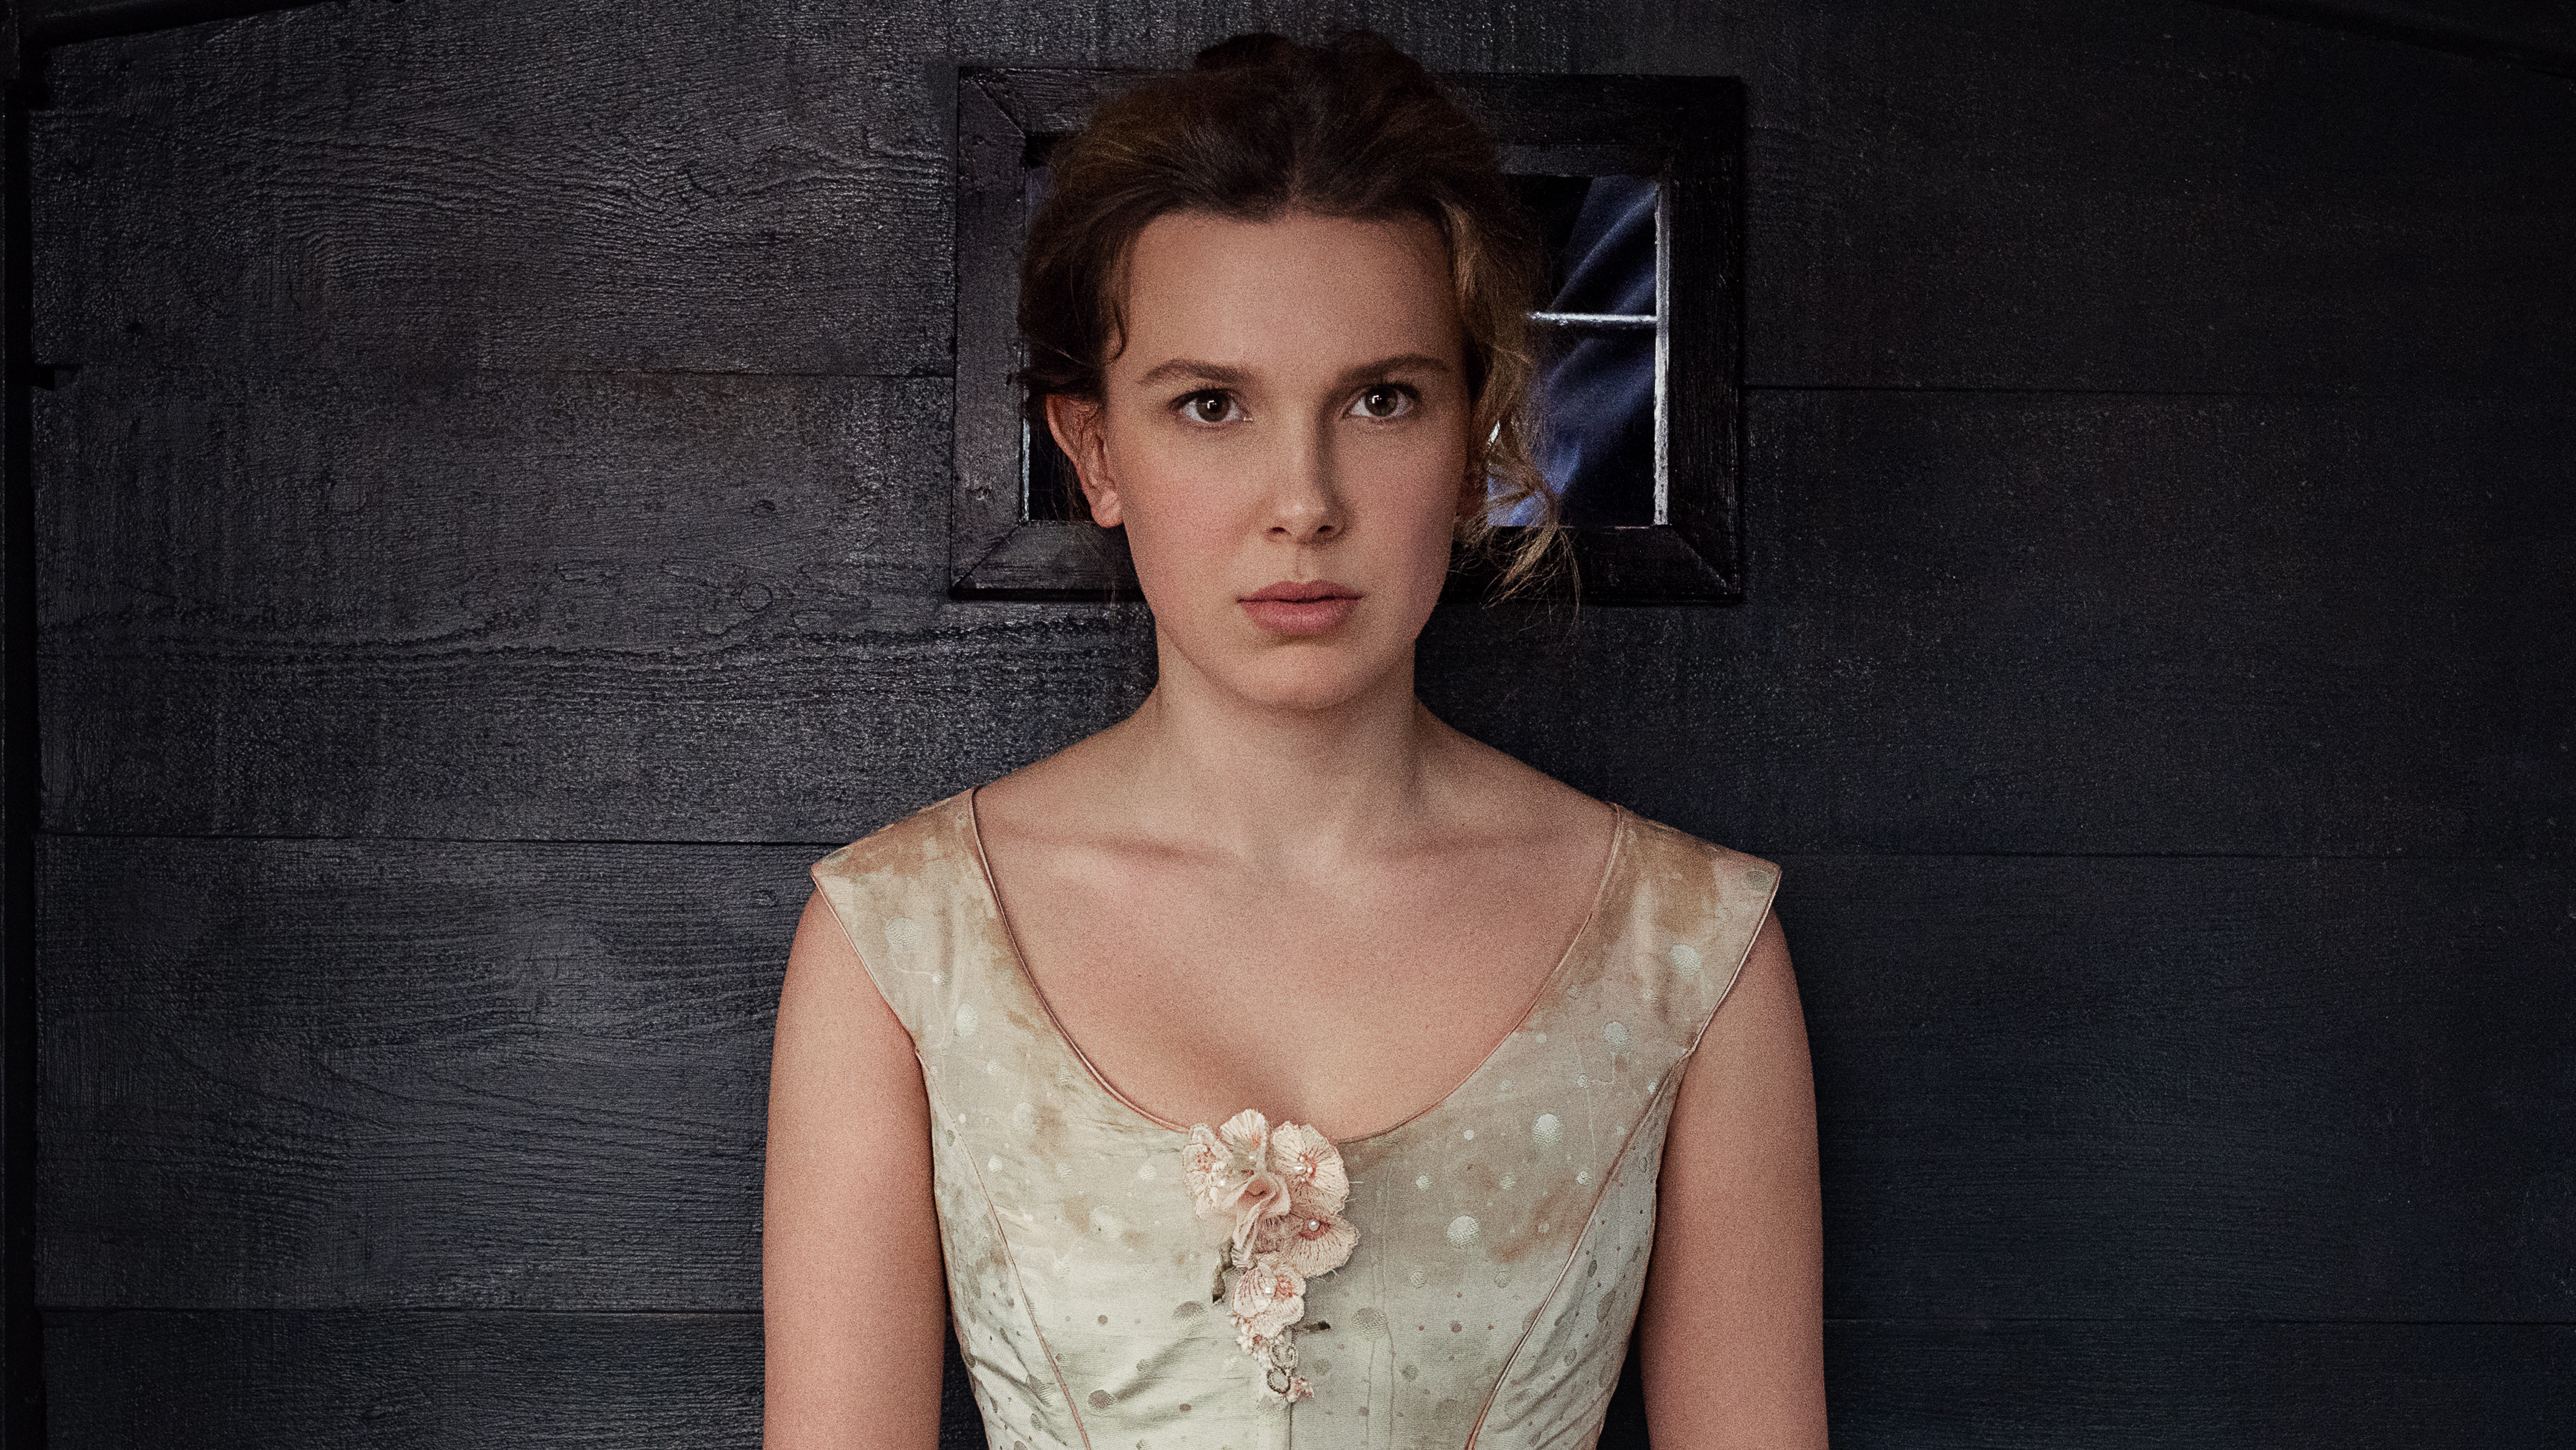 Enola Holmes 2' Director on Millie Bobby Brown Growing up 'Clever